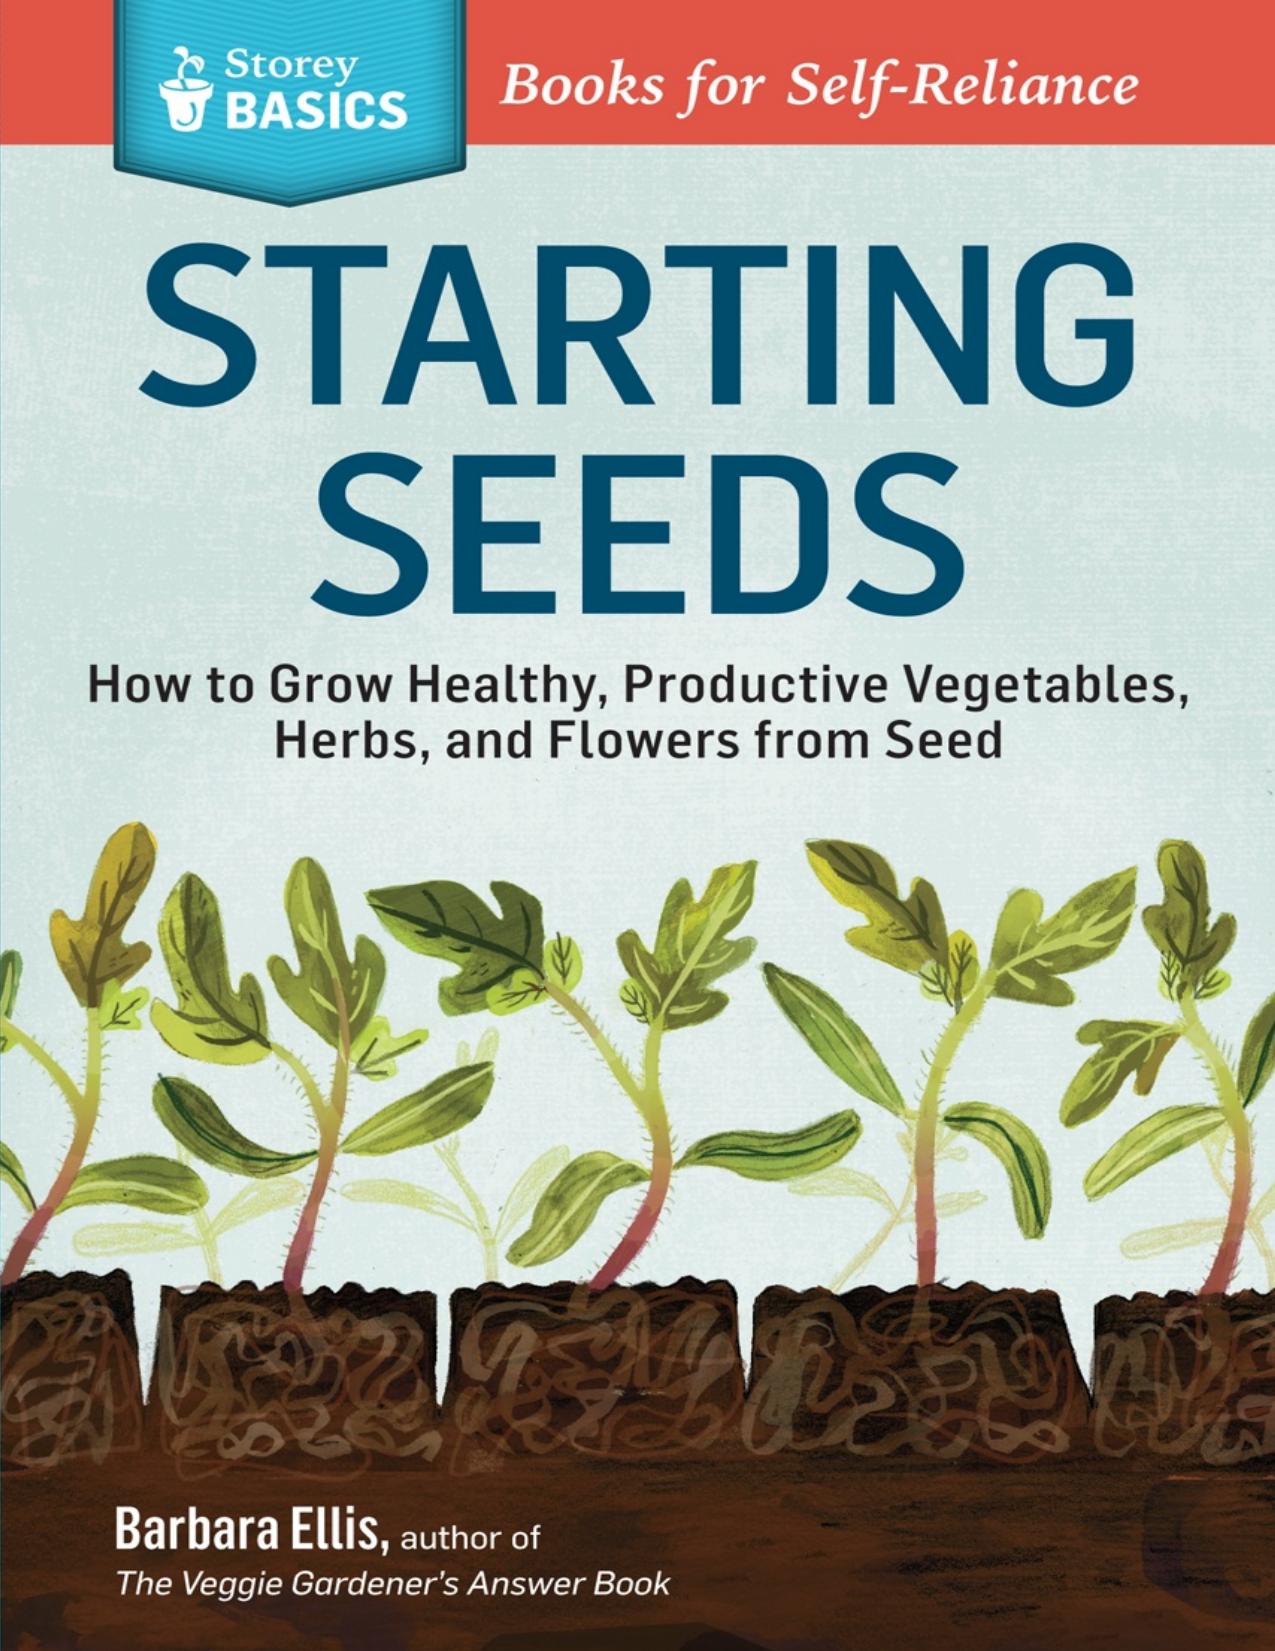 Starting Seeds: How to Grow Healthy, Productive Vegetables, Herbs, and Flowers from Seed. A Storey Basics Title - PDFDrive.com